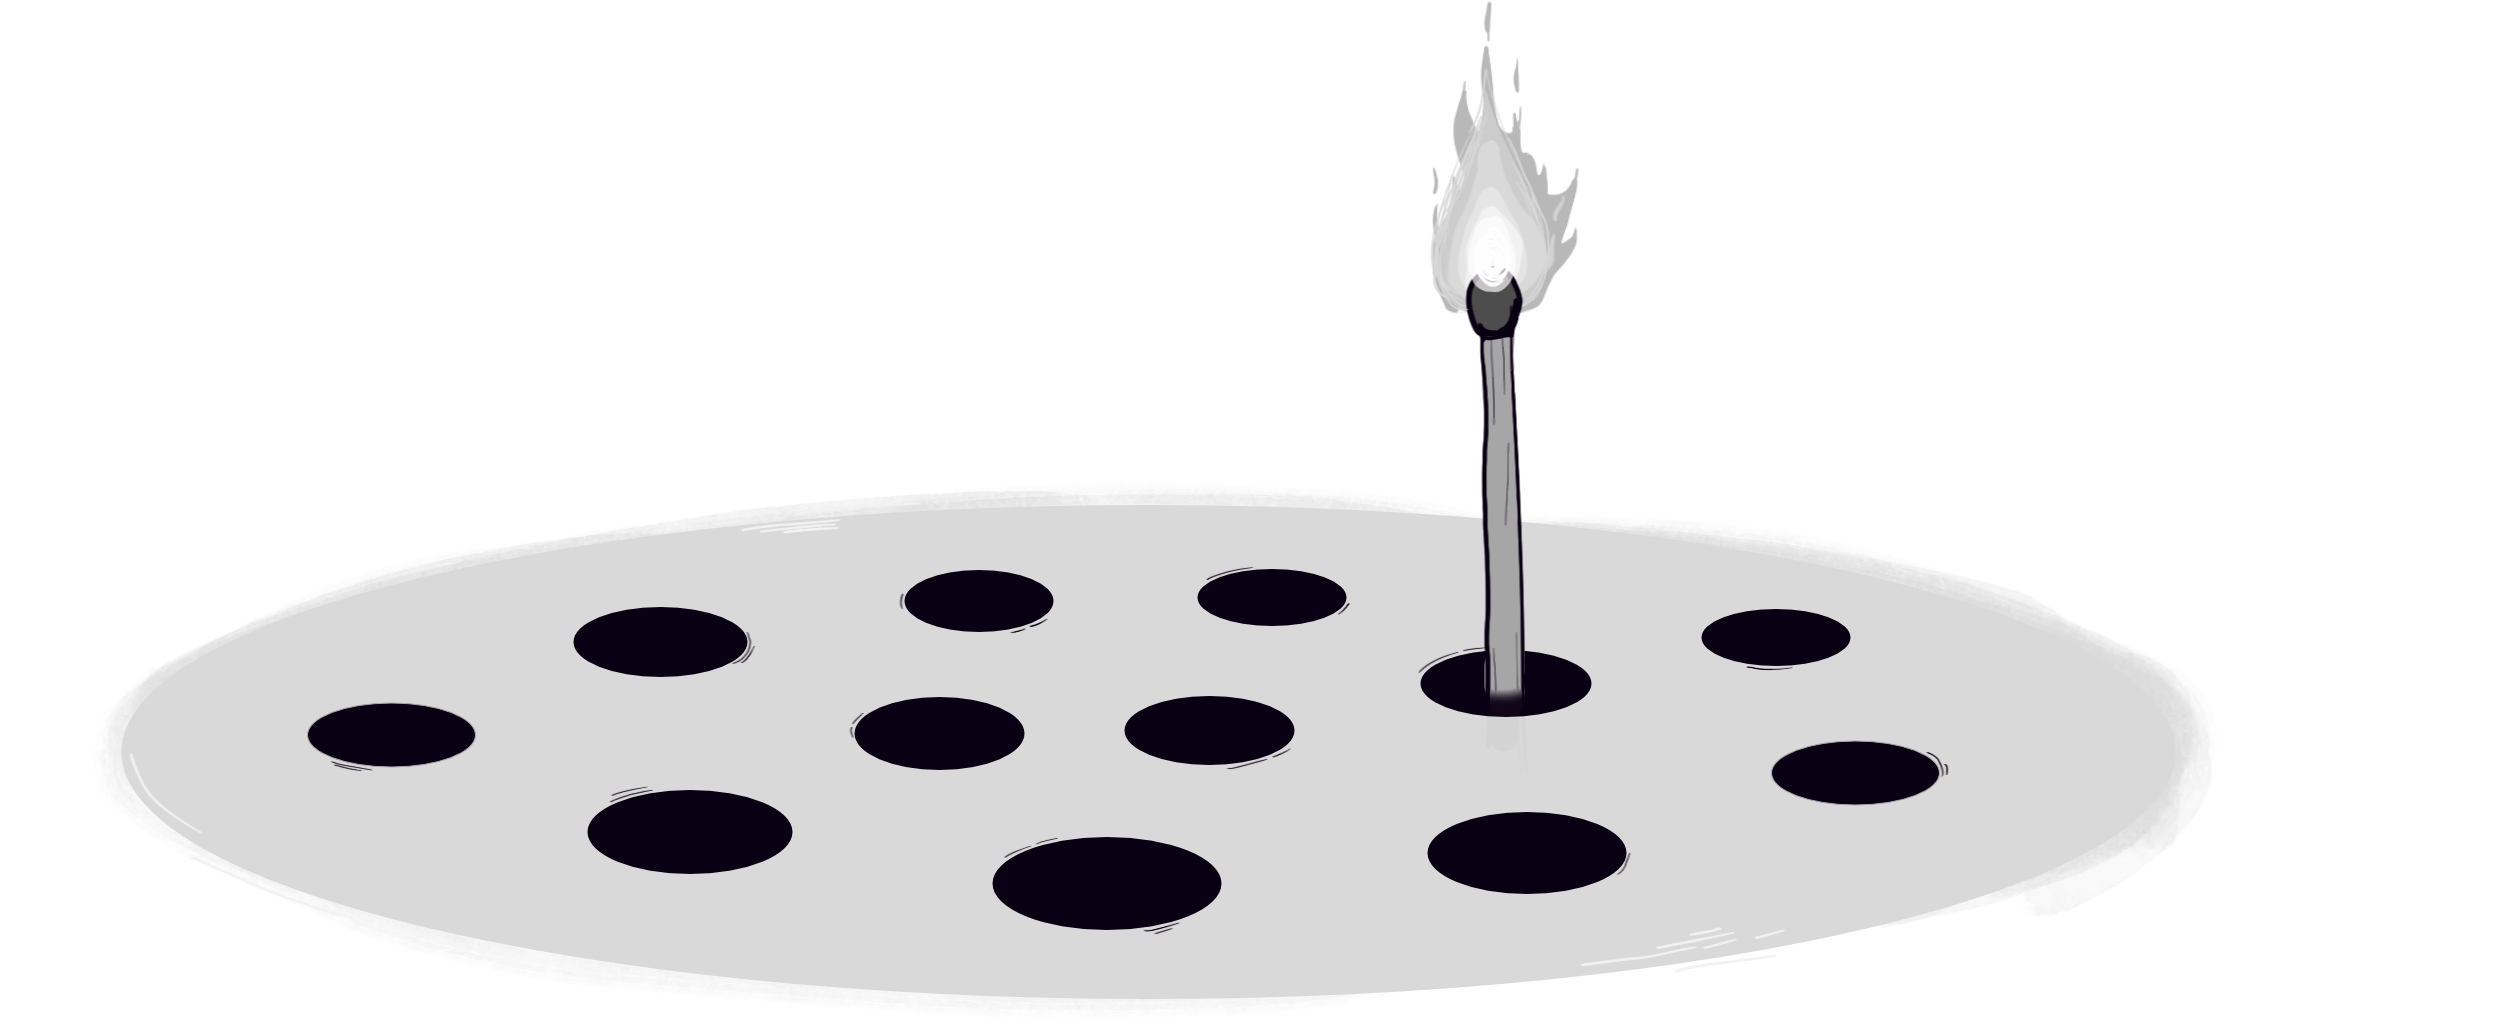 A wack-a-mole-surface with a lit match coming up from one hole